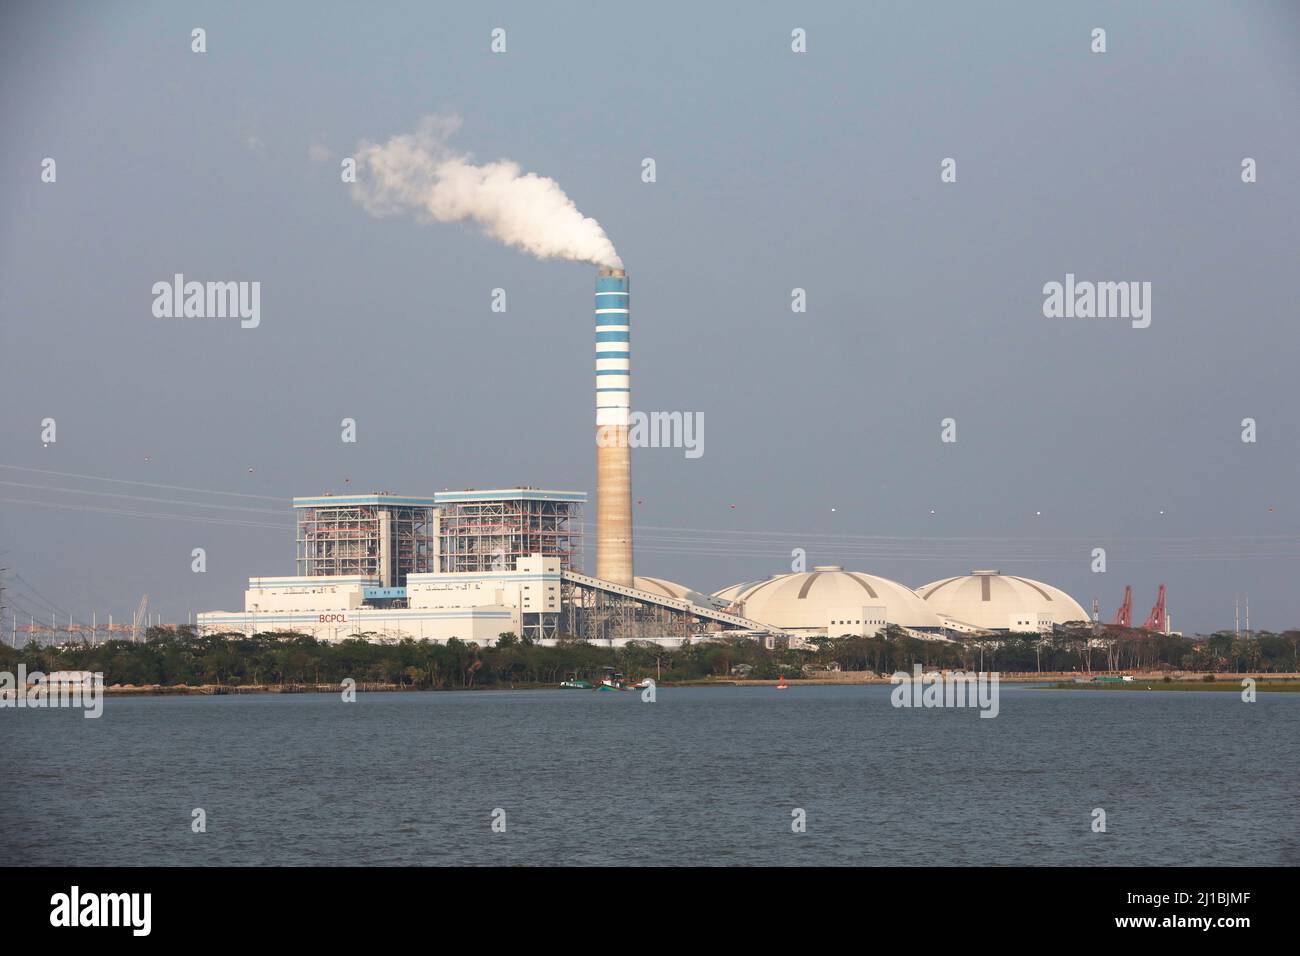 Patuakhali, Bangladesh - March 20, 2022: The Payra 1,320 megawatt coal-fired power station built in Kalapara Upazila of Patuakhali District in souther Stock Photo